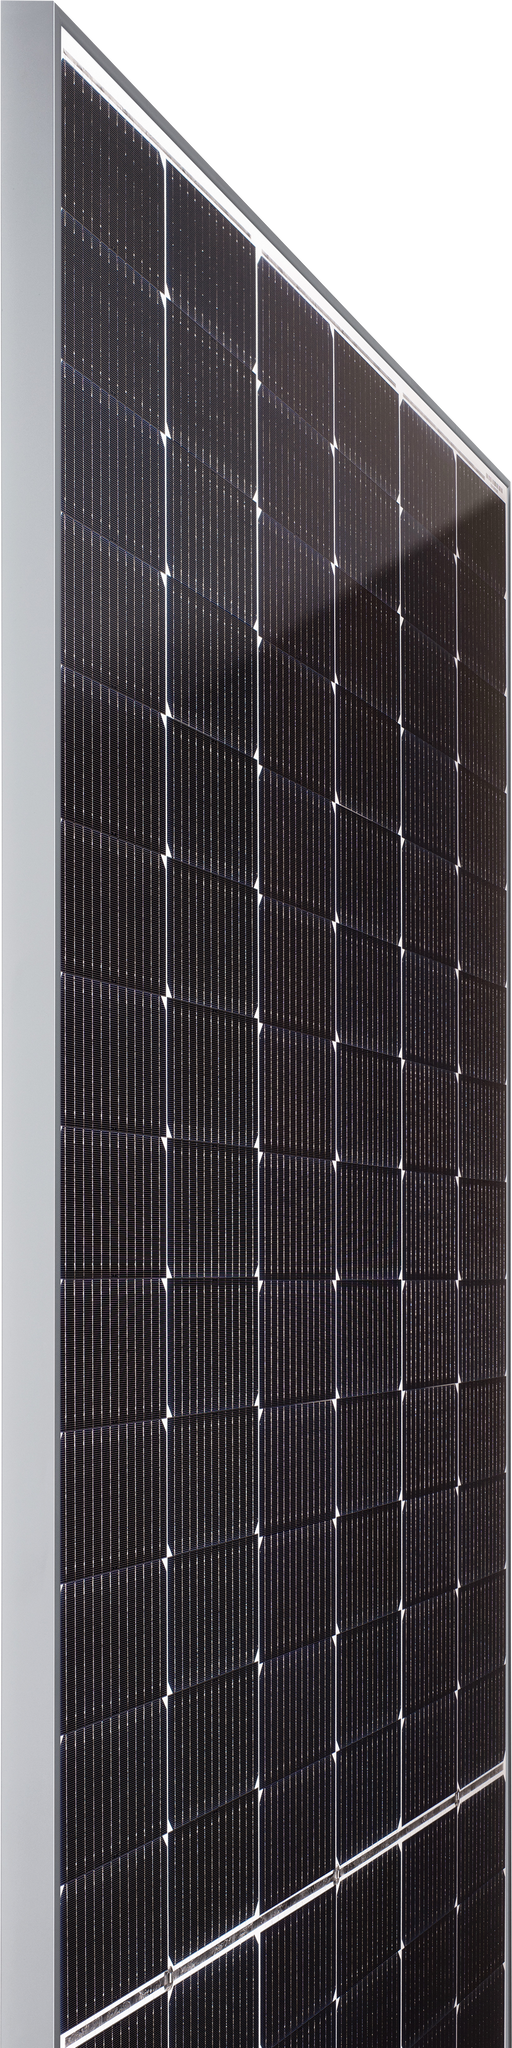 QCELL 480W Q.PEAK DUO XL-G10.3/BFG Gray Frame Solar Panel - 21.7% Max Efficiency 480W Panel for Homes & Commercial (Single Panel)